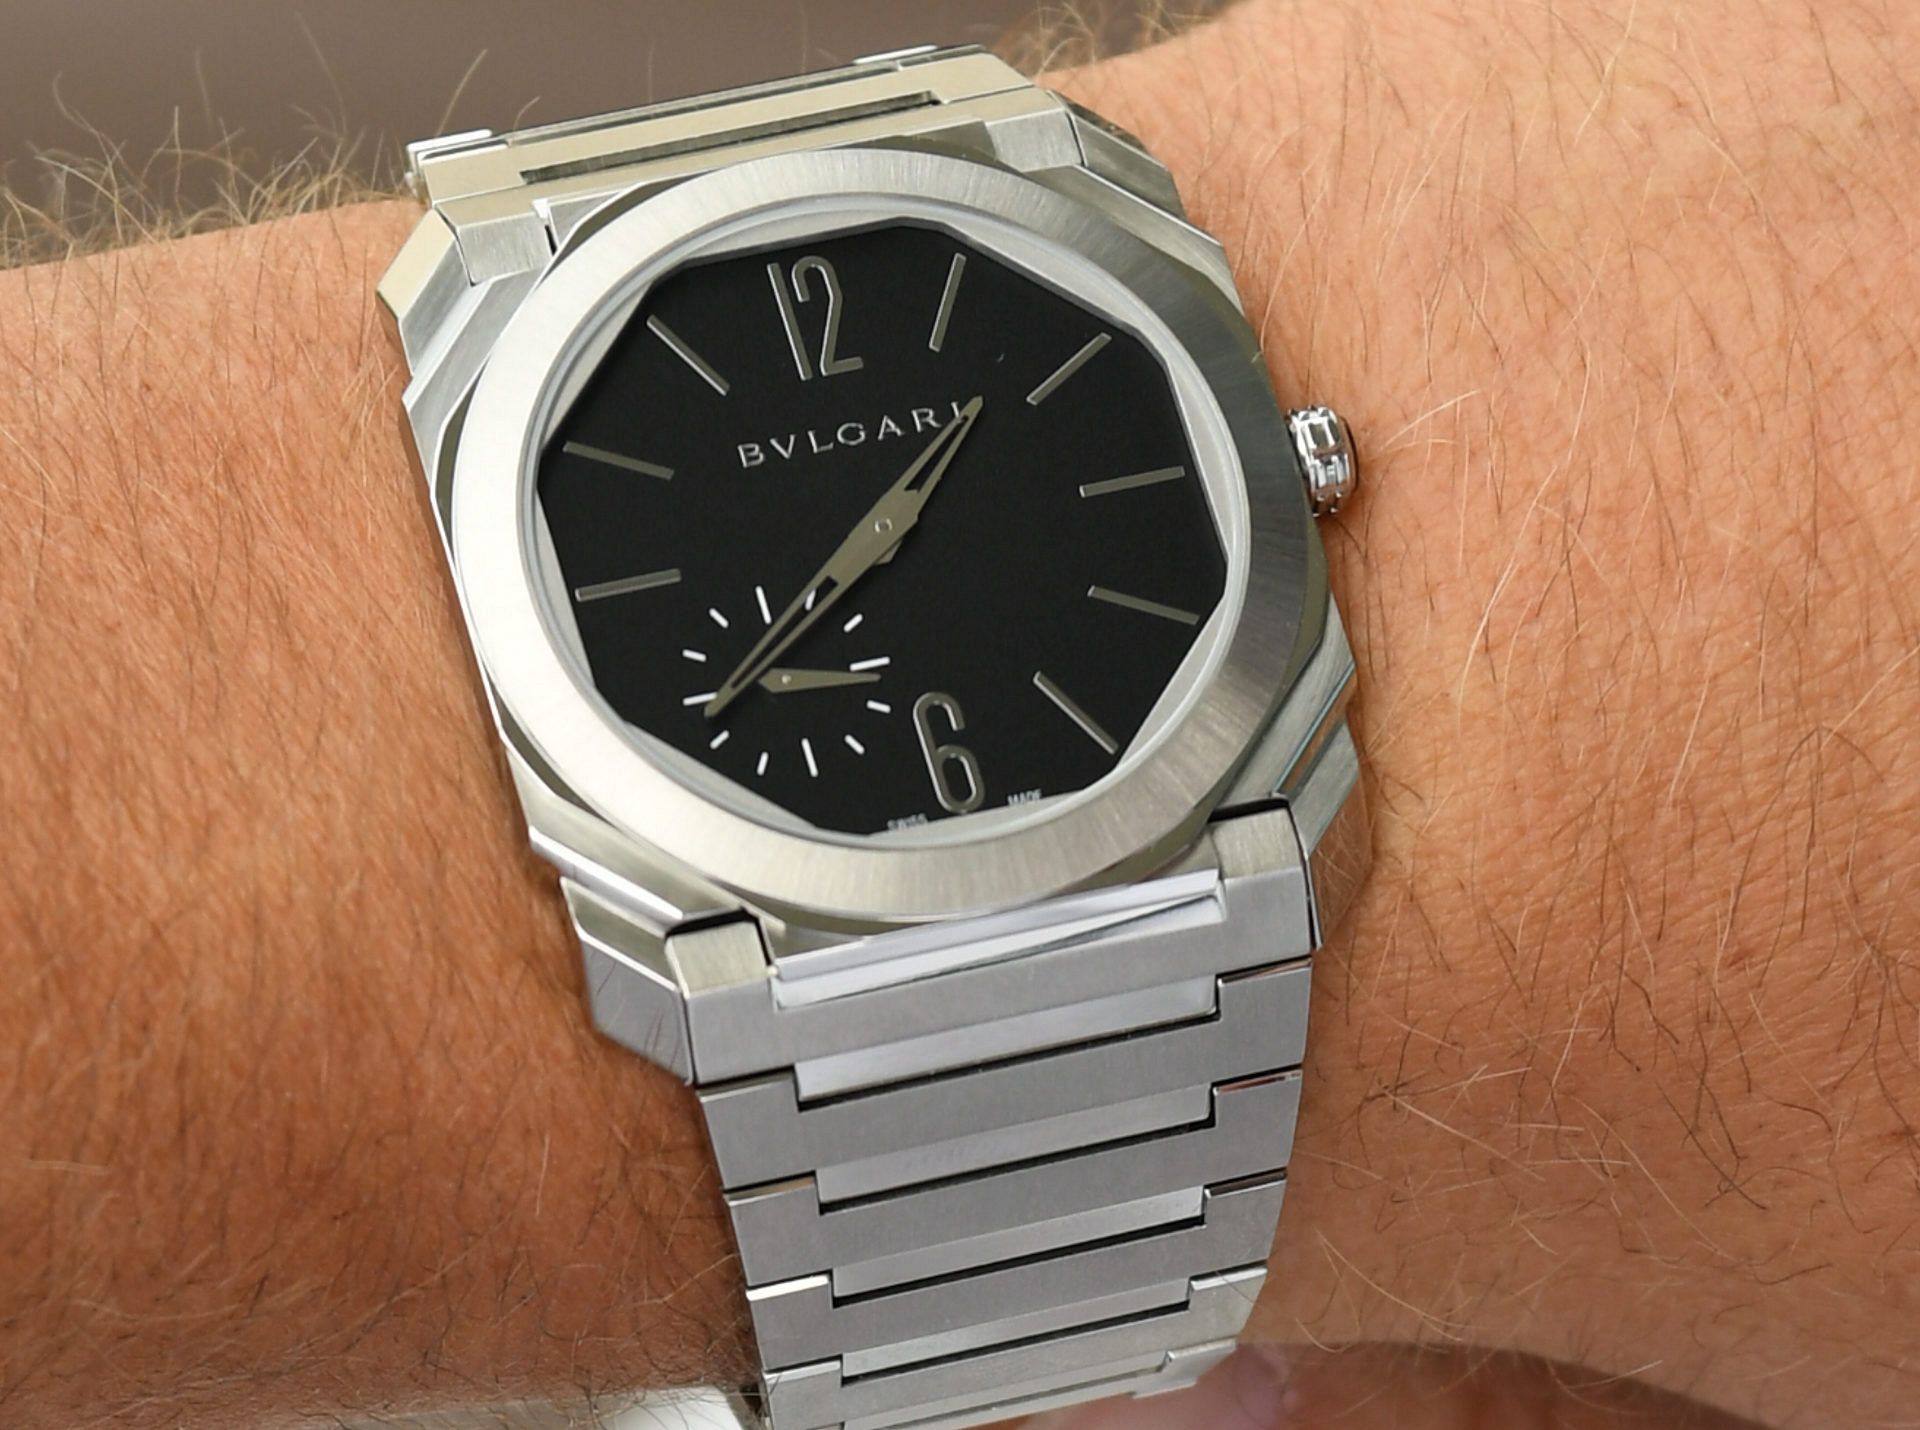 Bulgari Octo Finissimo satin polished steel review pricing 2020